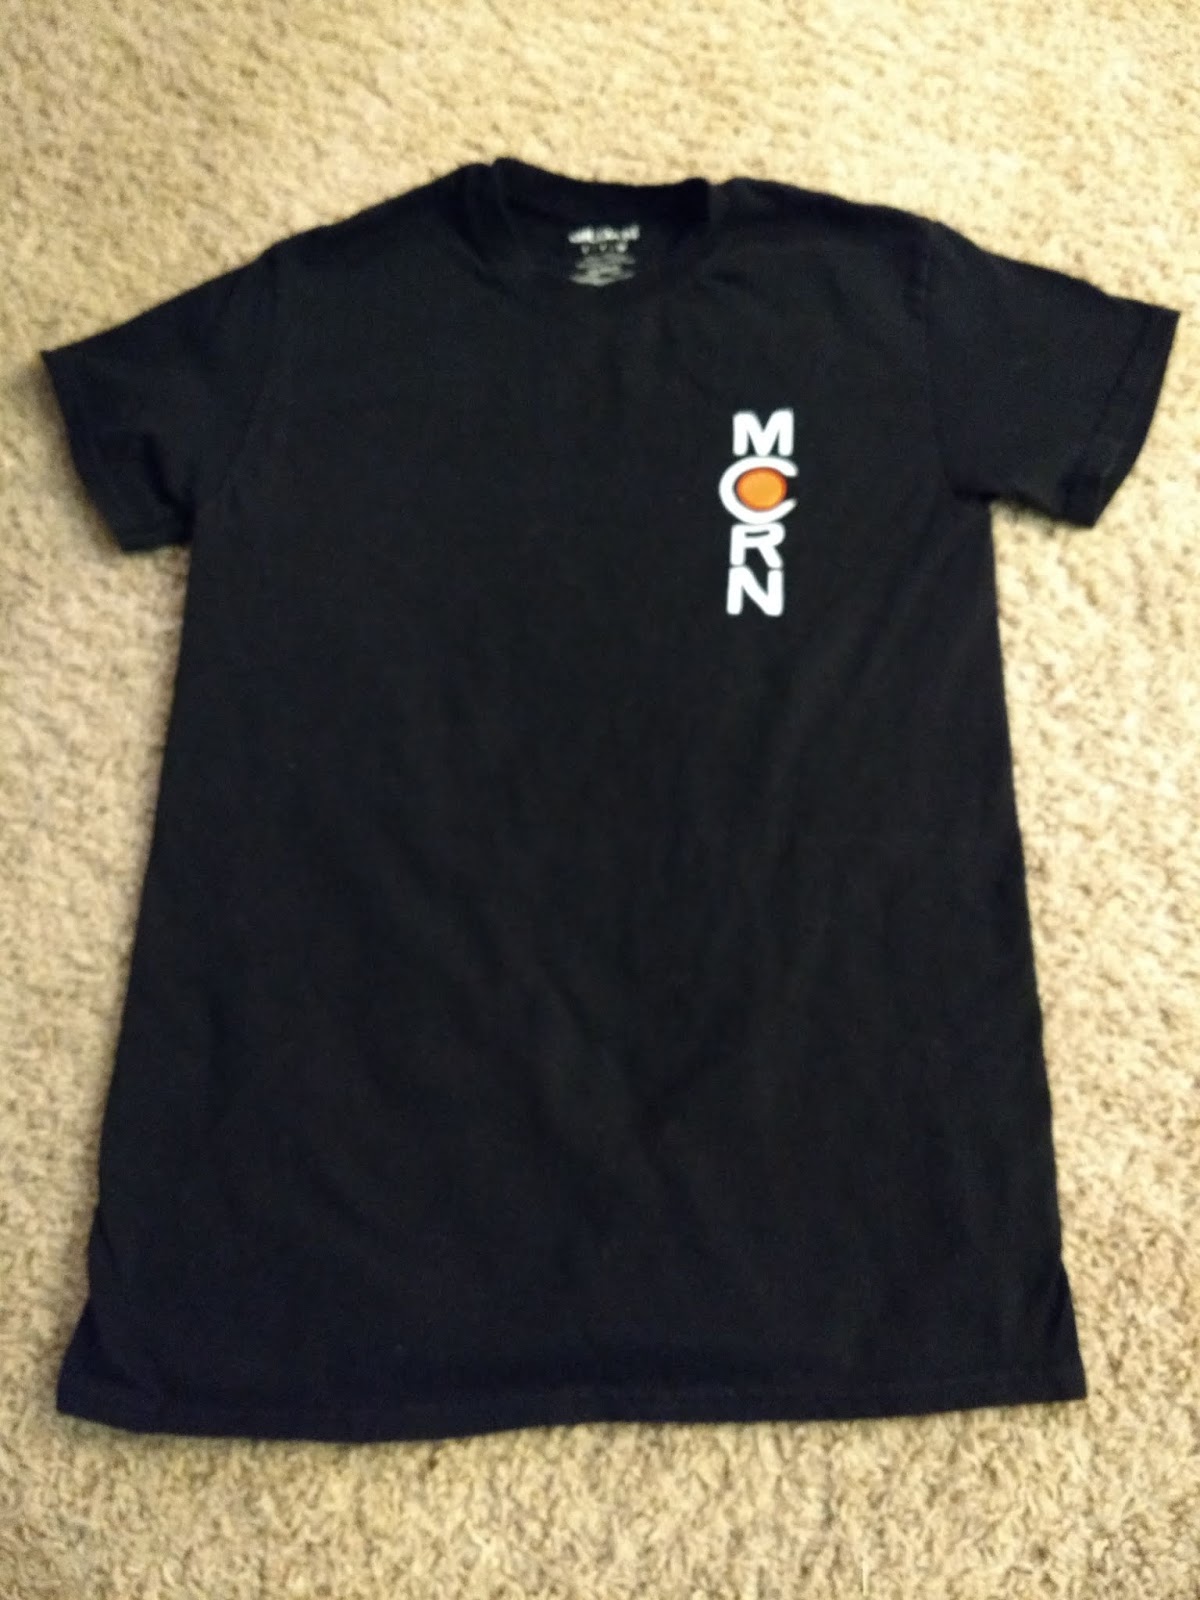 Kris' Crafts: Expanse T-Shirts - MCRN and Star Helix Logos